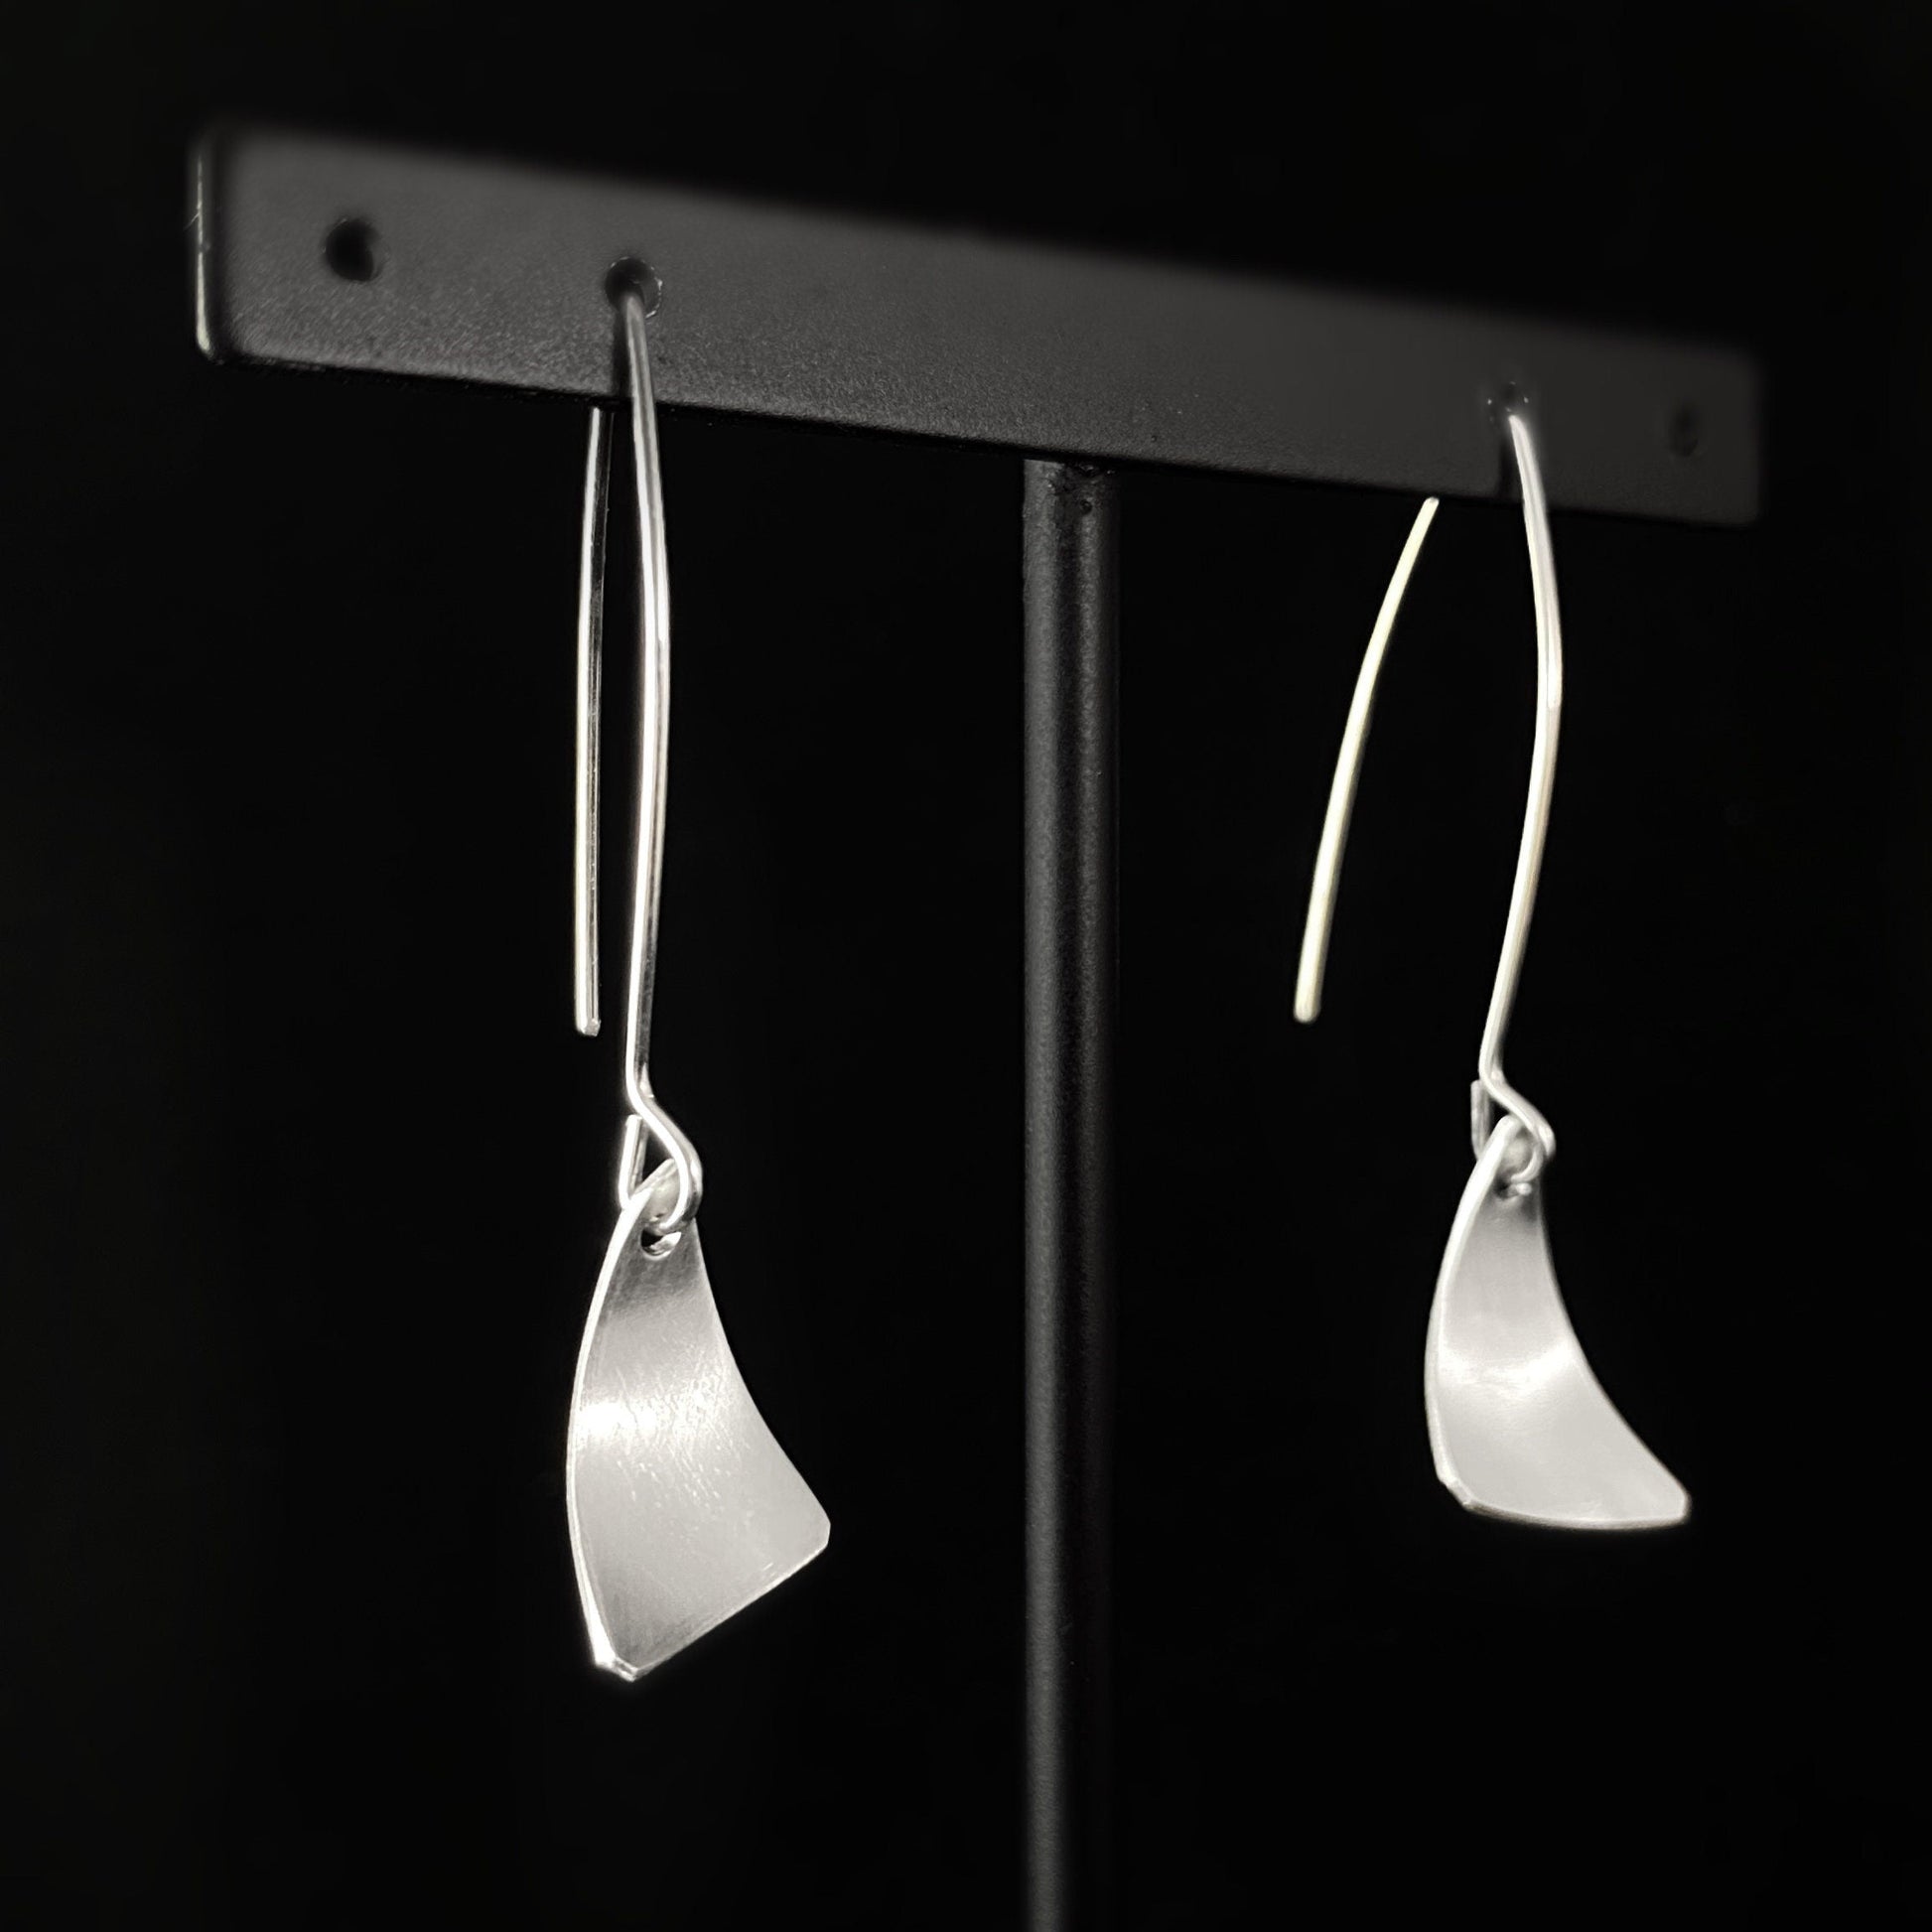 Silver Triangle/Sailboat Earrings, Handmade - Recycled Materials